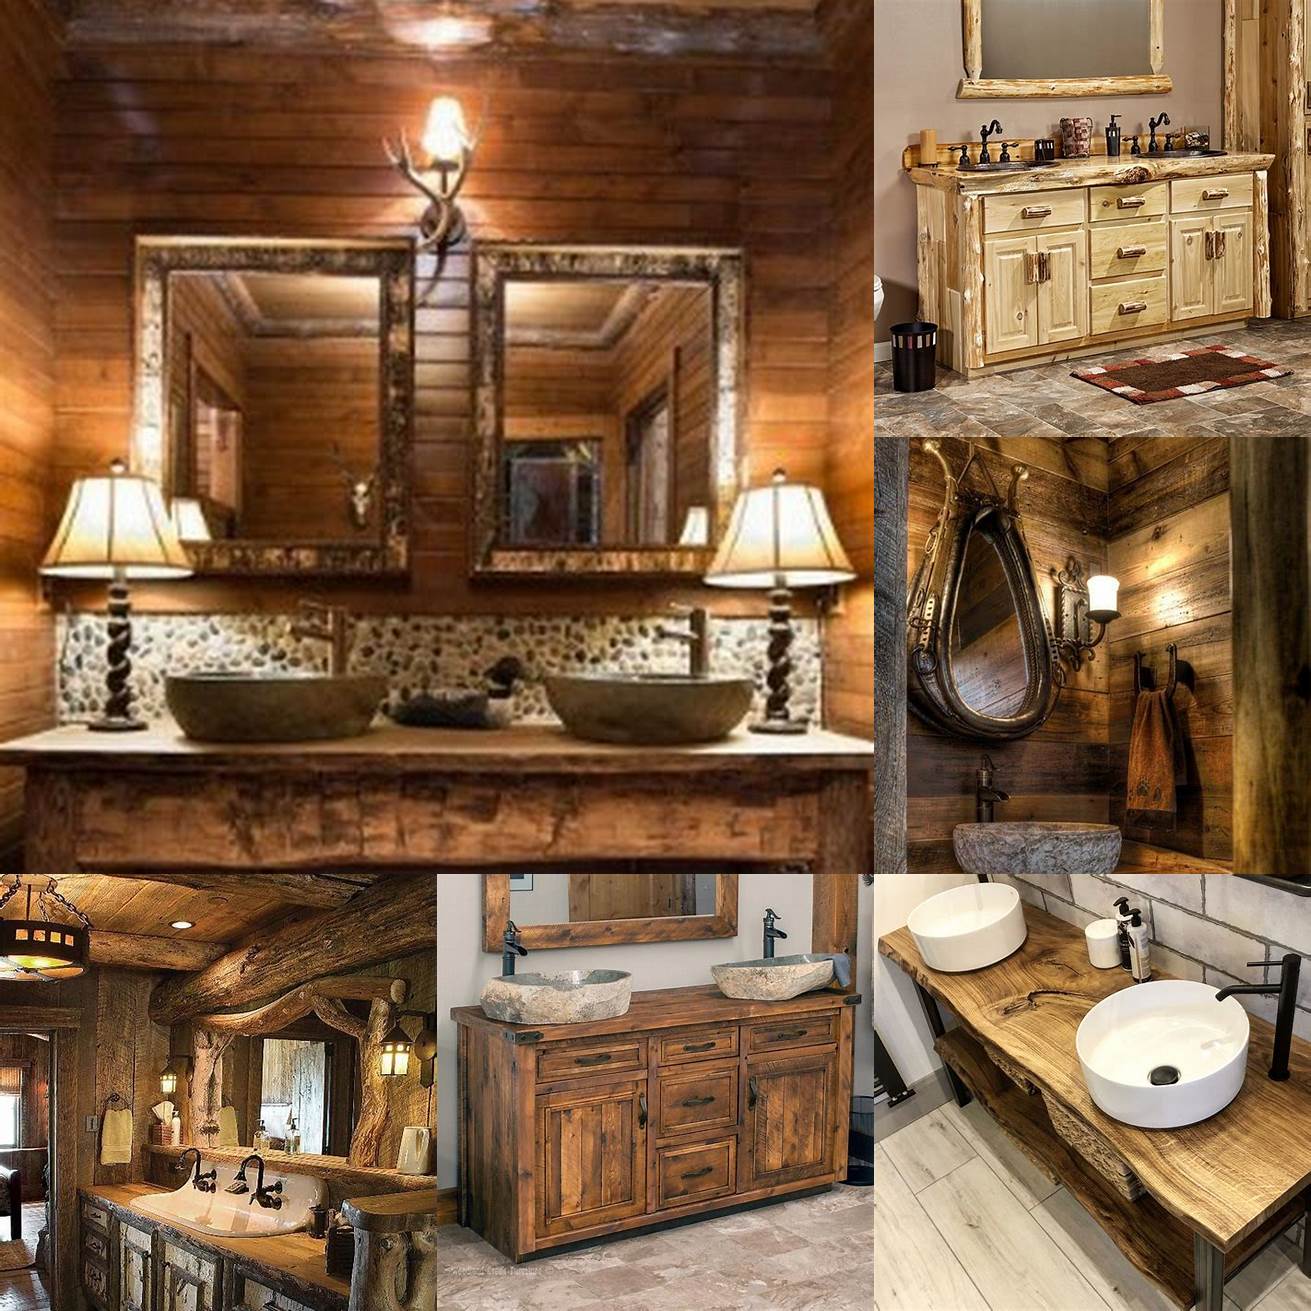 A log rustic bathroom vanity can create an earthy and natural atmosphere in your bathroom